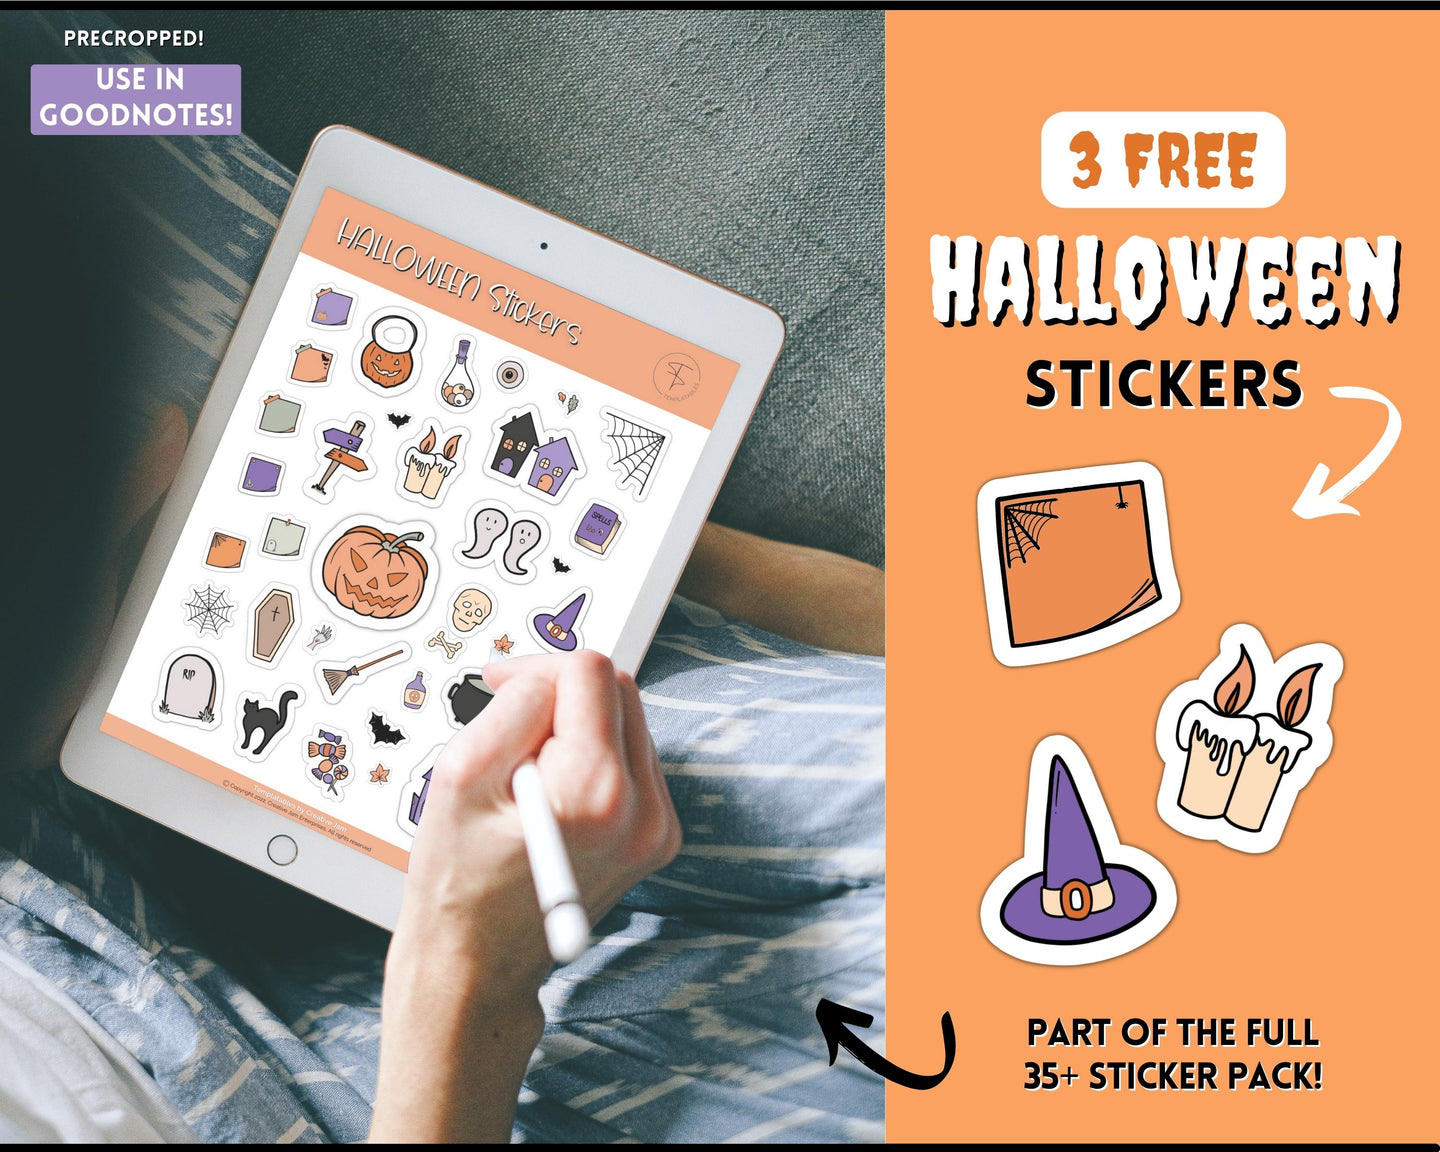 3 FREE Halloween Digital Stickers for iPad | GoodNotes, NotabilityPre cropped PNG | FREE